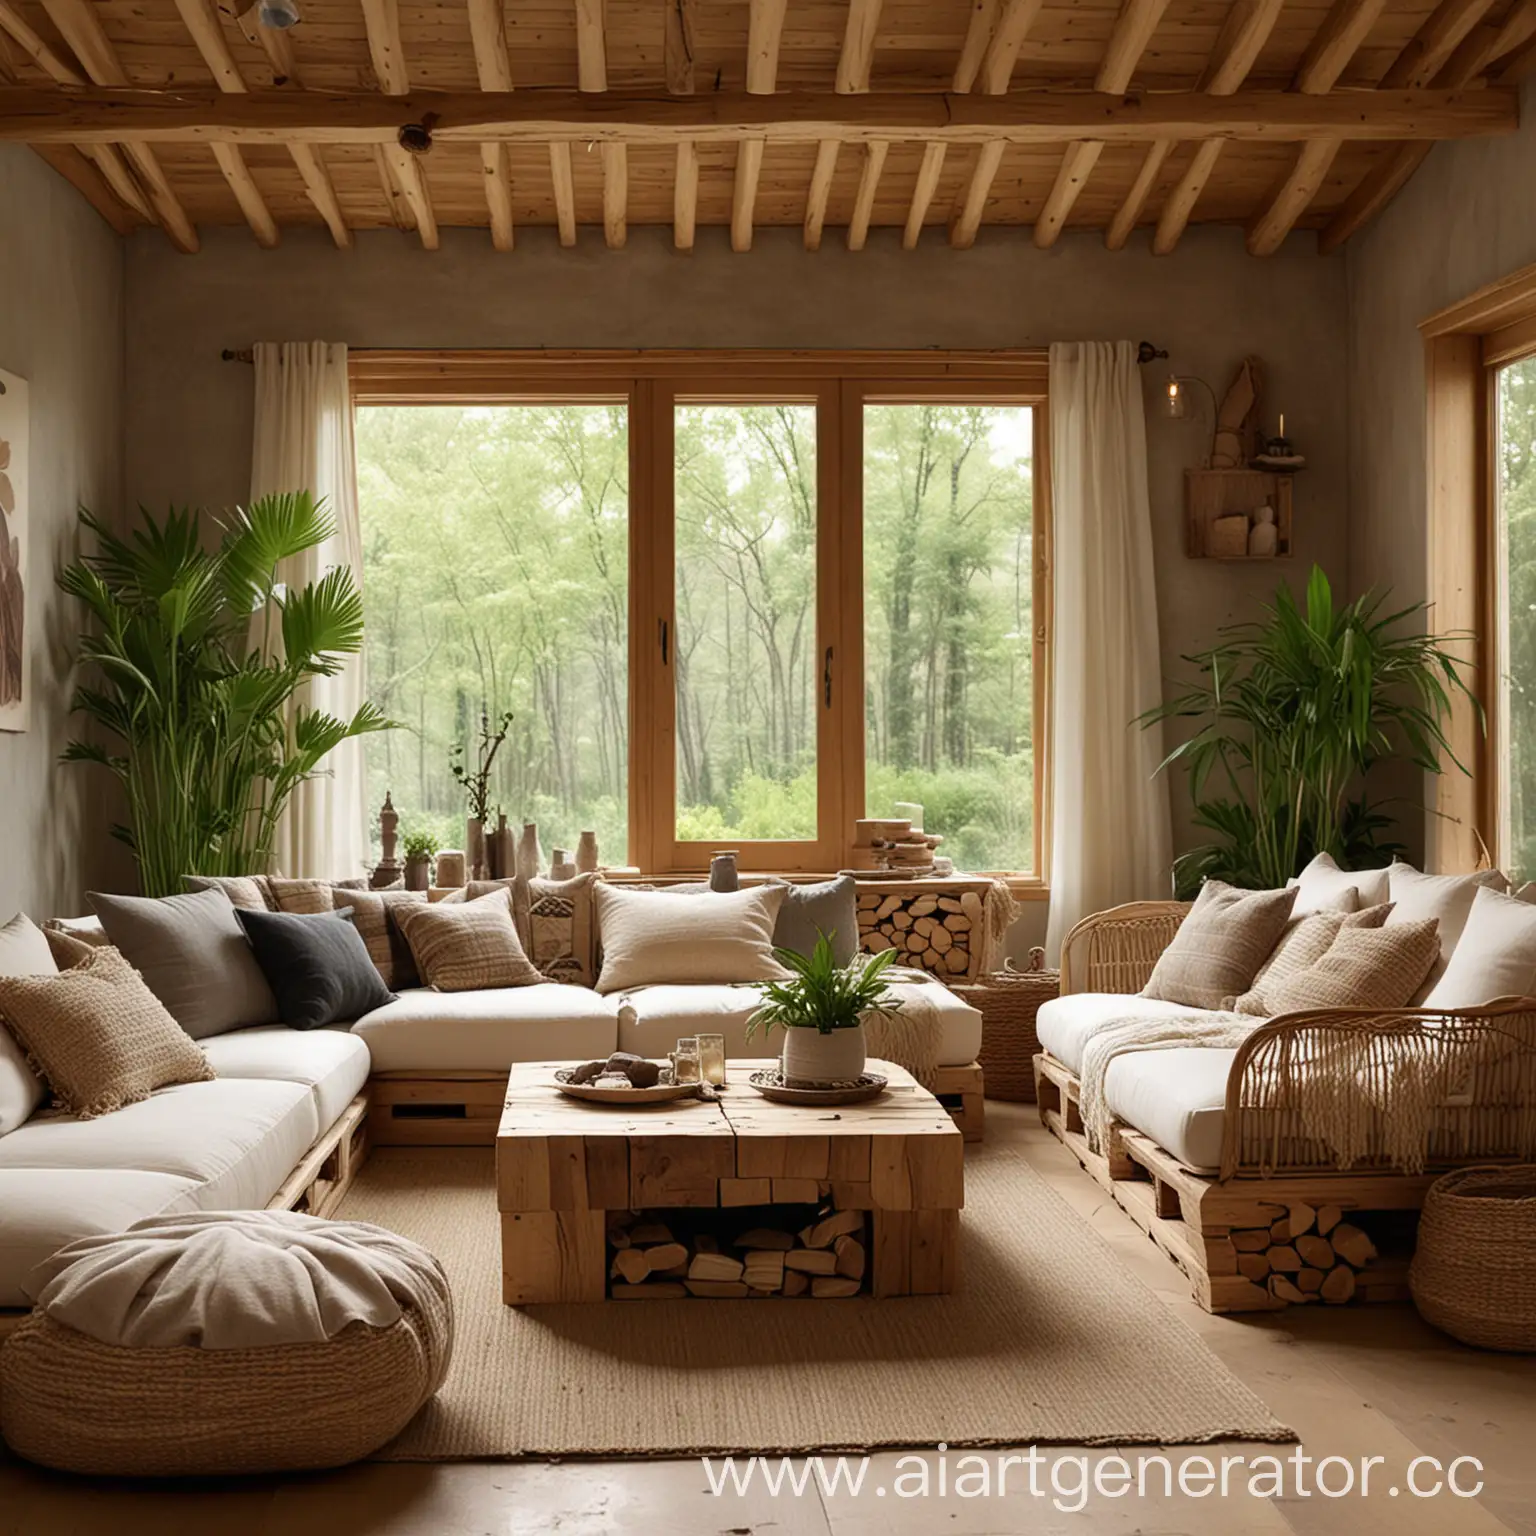 Cozy-EcoStyle-Living-Room-with-Natural-Materials-and-Fireplace